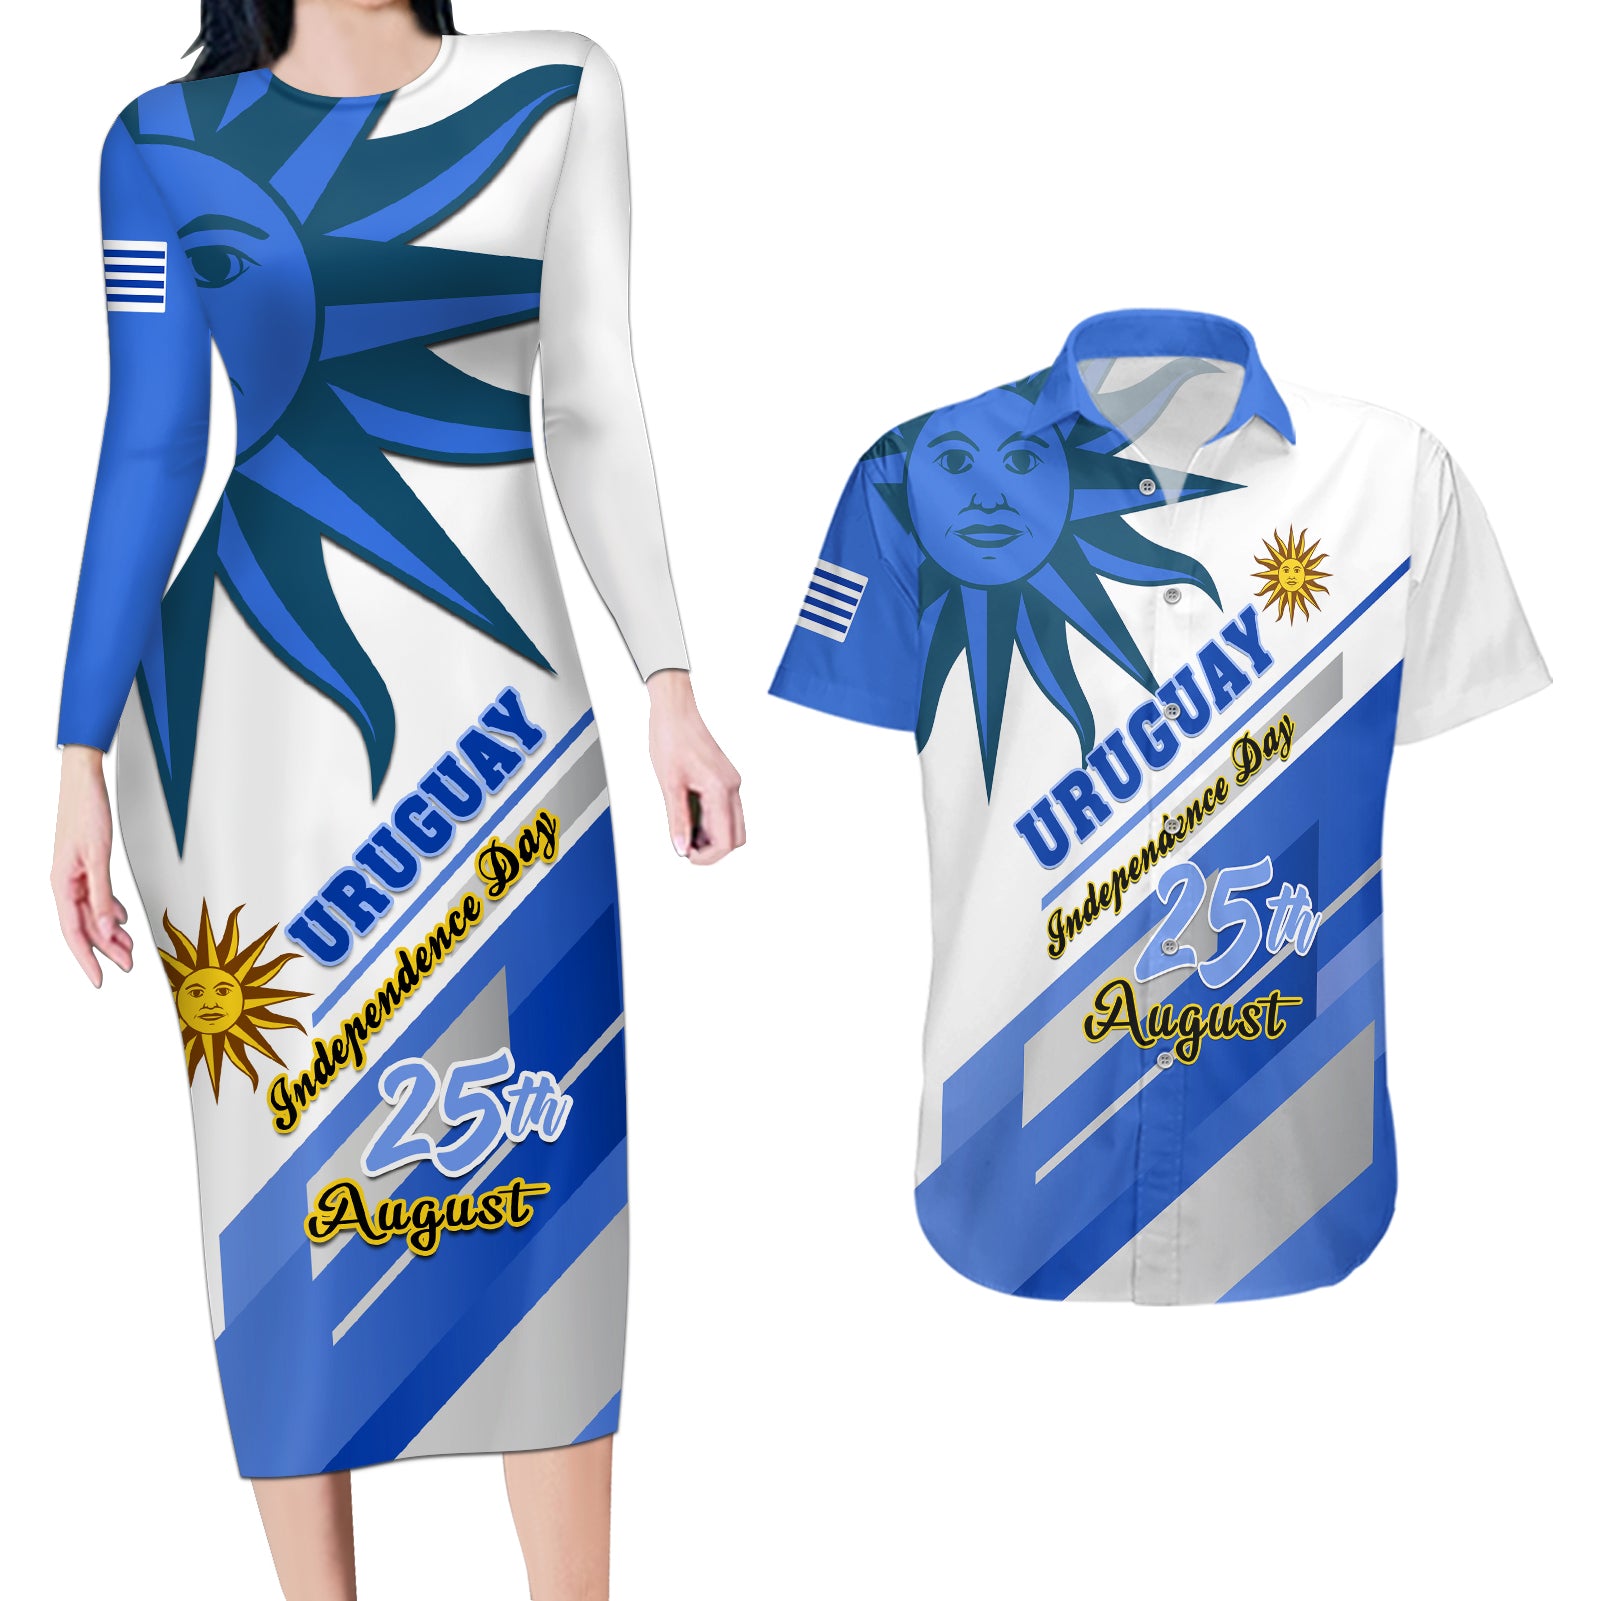 personalised-uruguay-independence-day-couples-matching-long-sleeve-bodycon-dress-and-hawaiian-shirt-uruguayan-sol-de-mayo-special-version